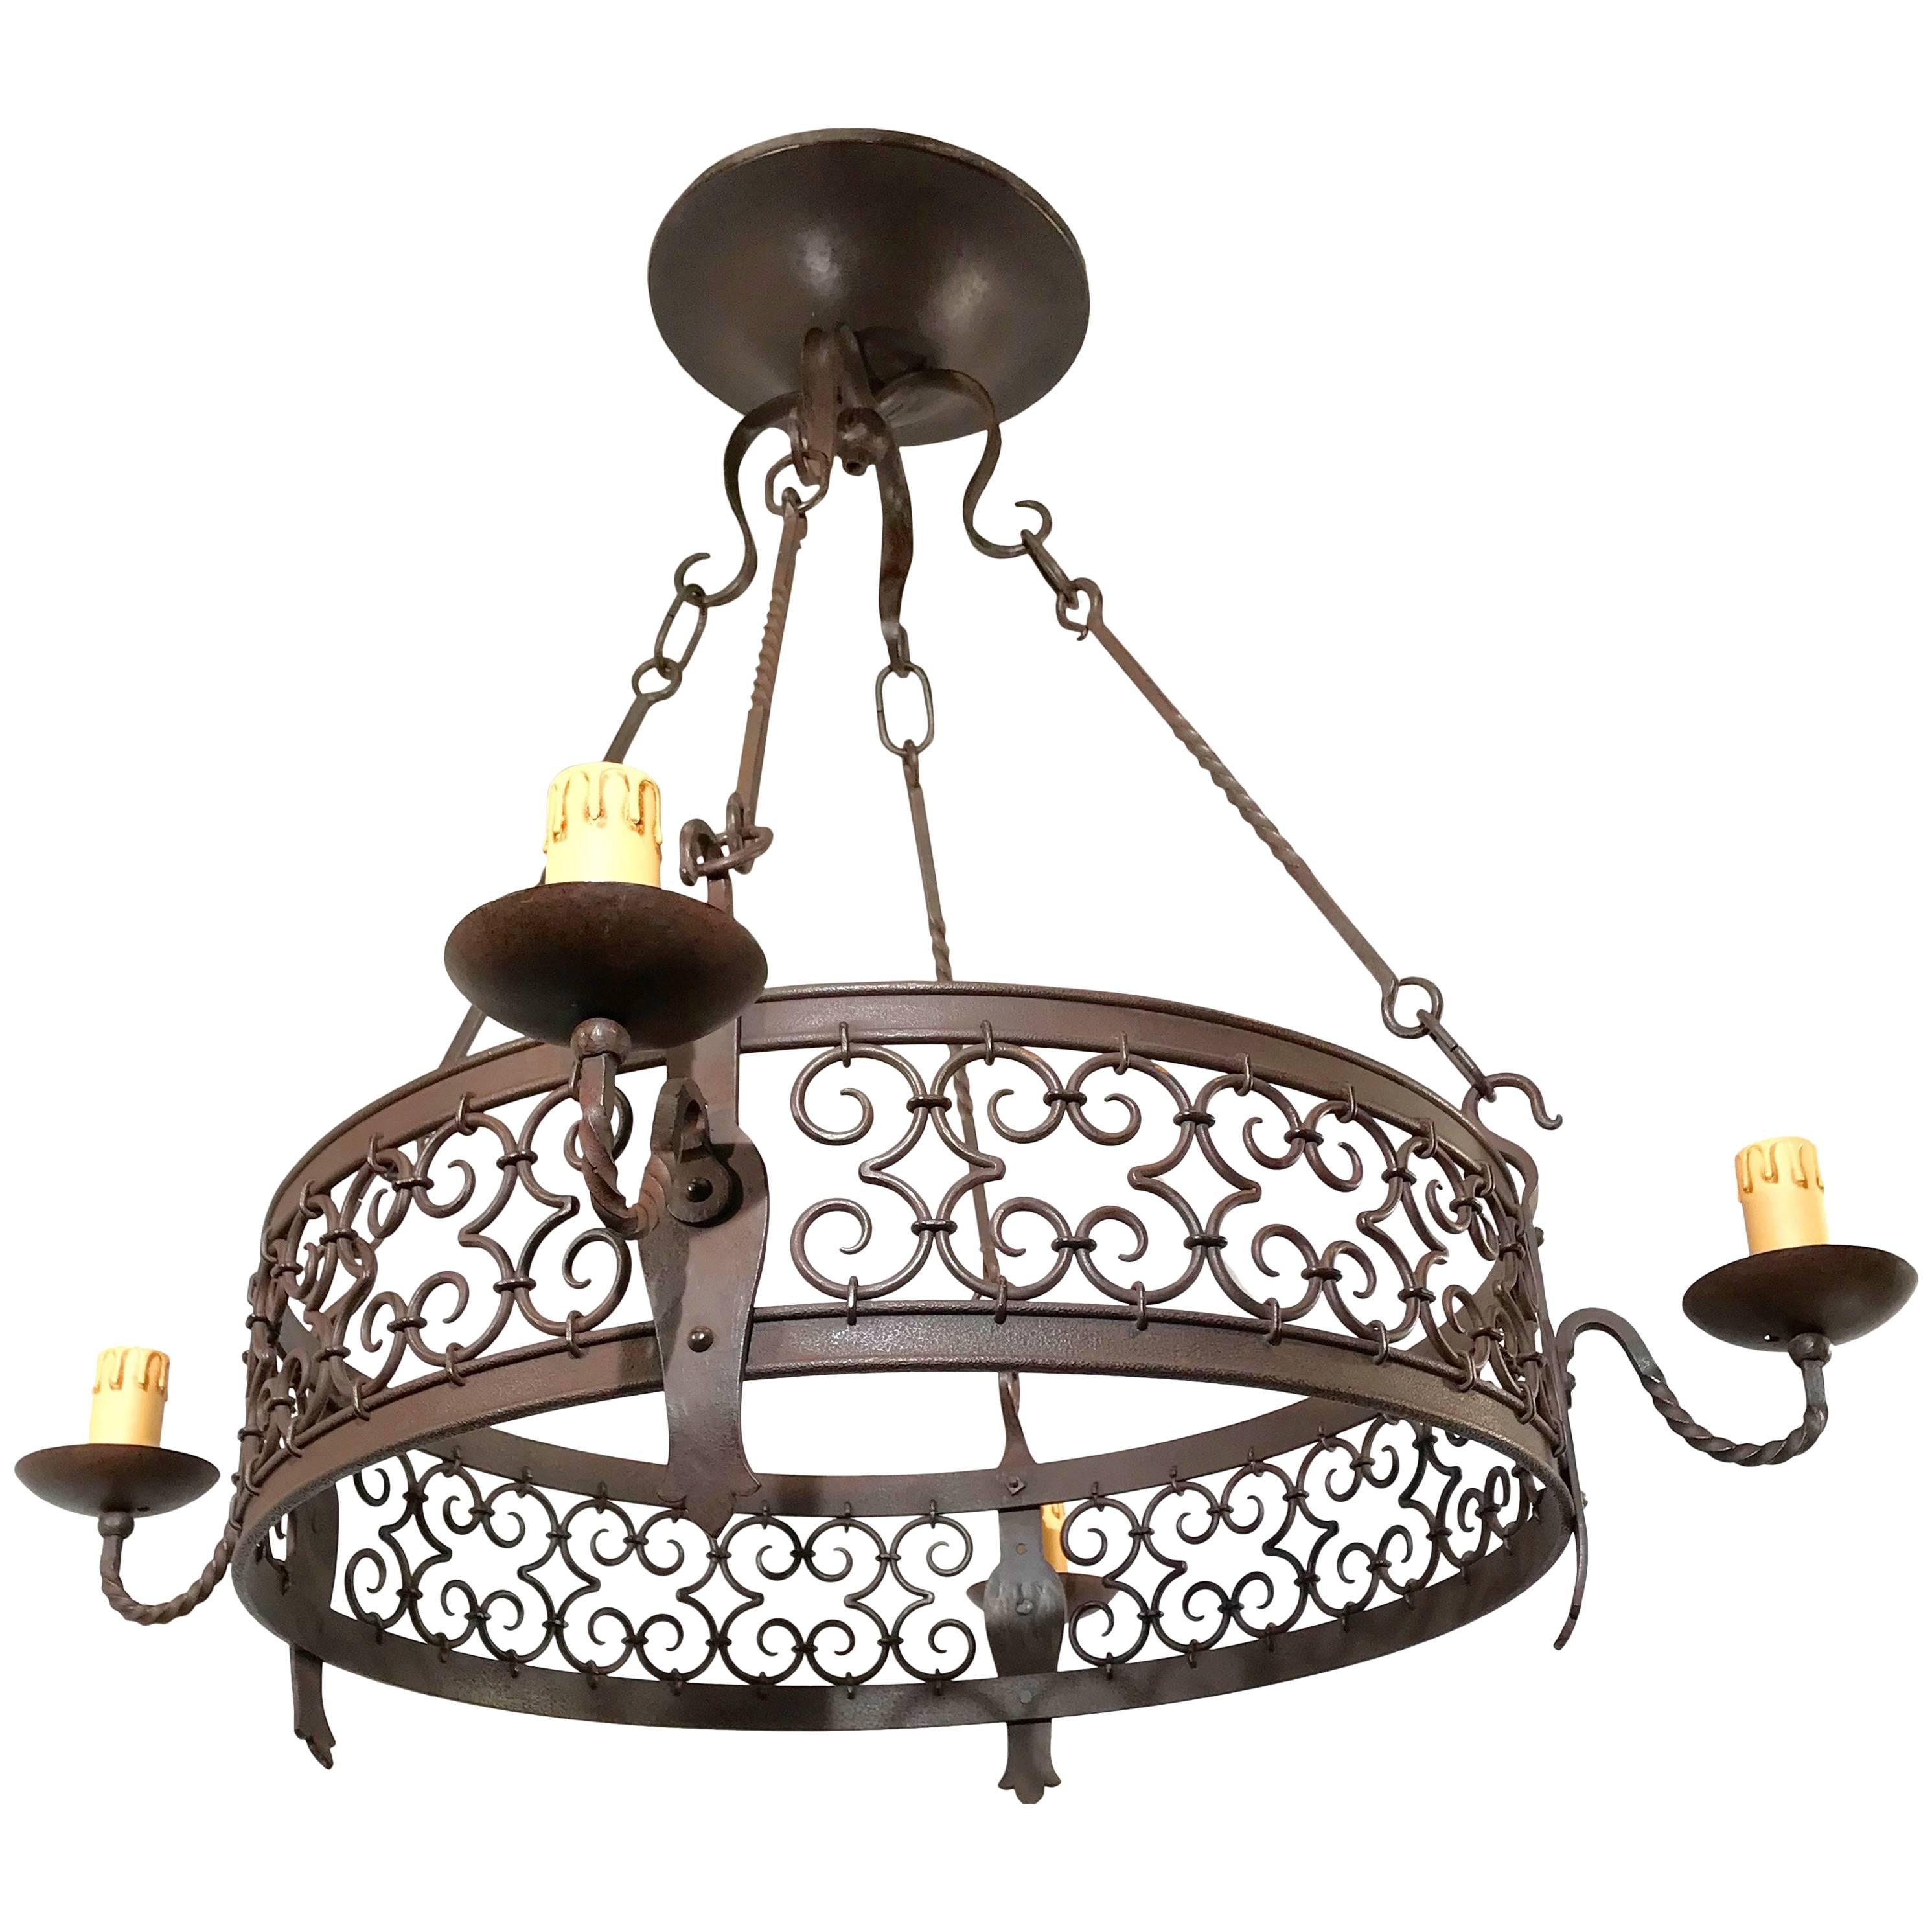 Large Arts & Crafts Forged in Fire Wrought Iron Chandelier Pendant Light Fixture For Sale